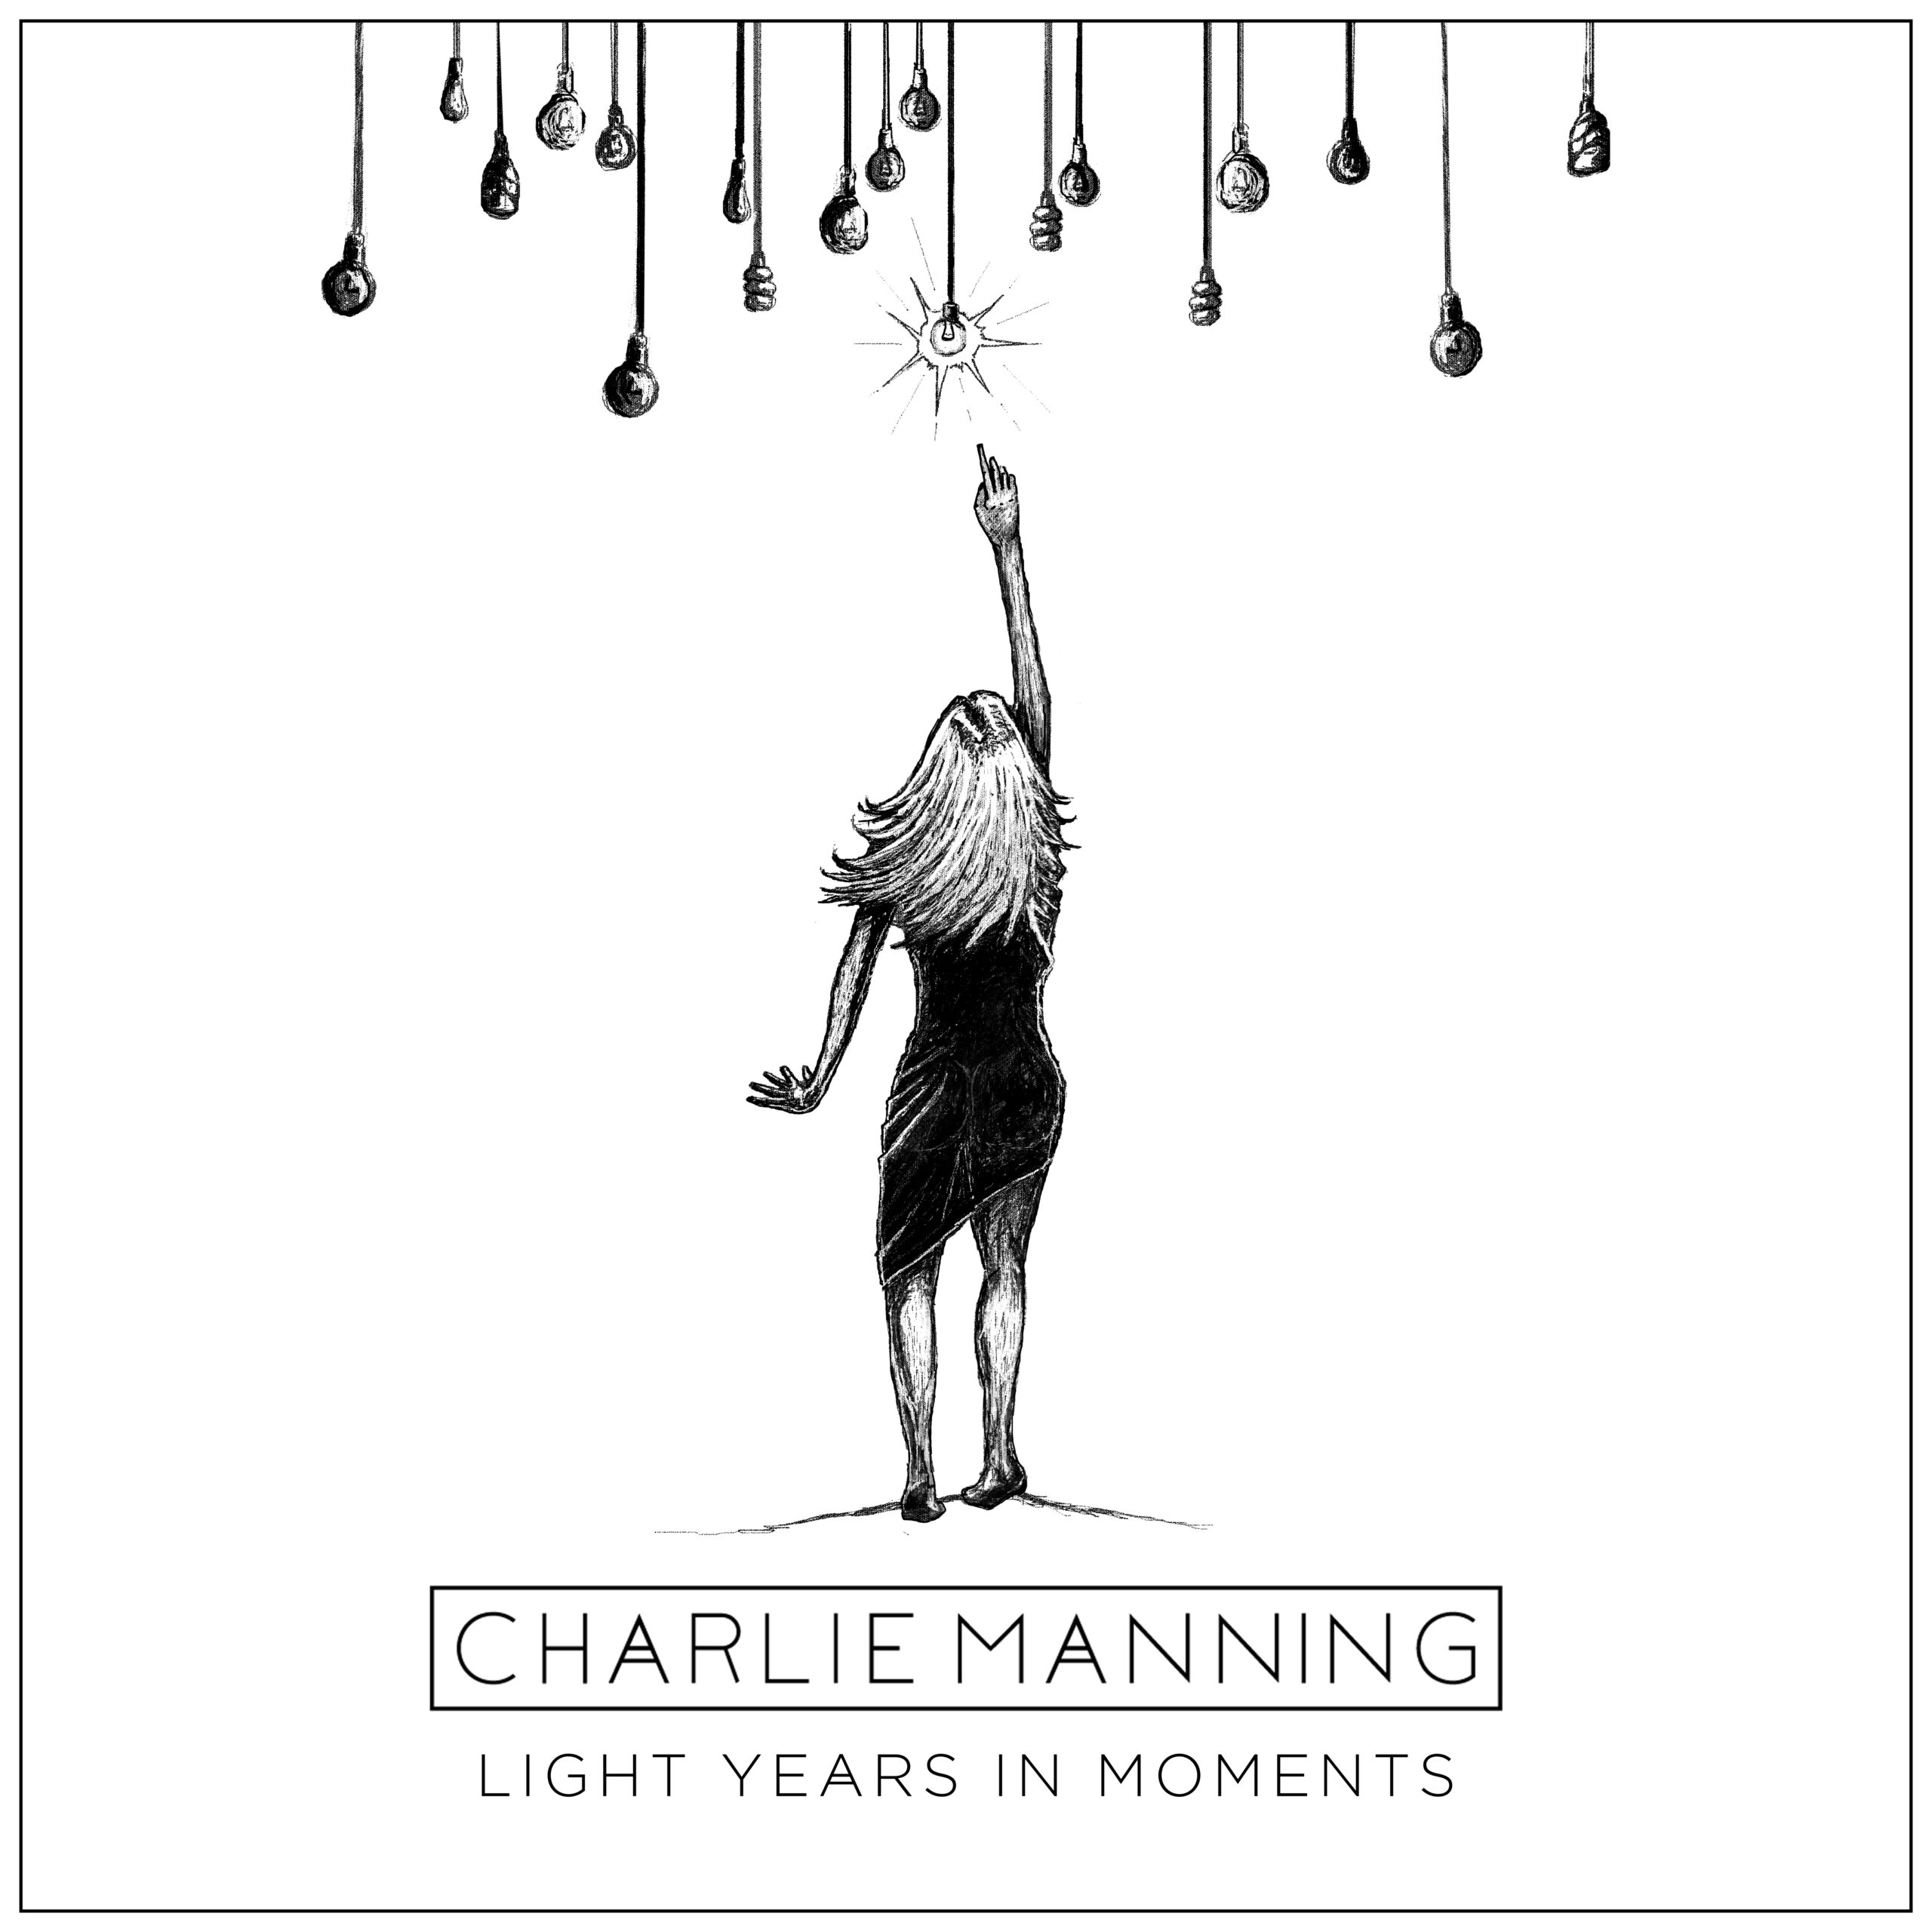 Charlie Manning Light Years in Moments Artwork